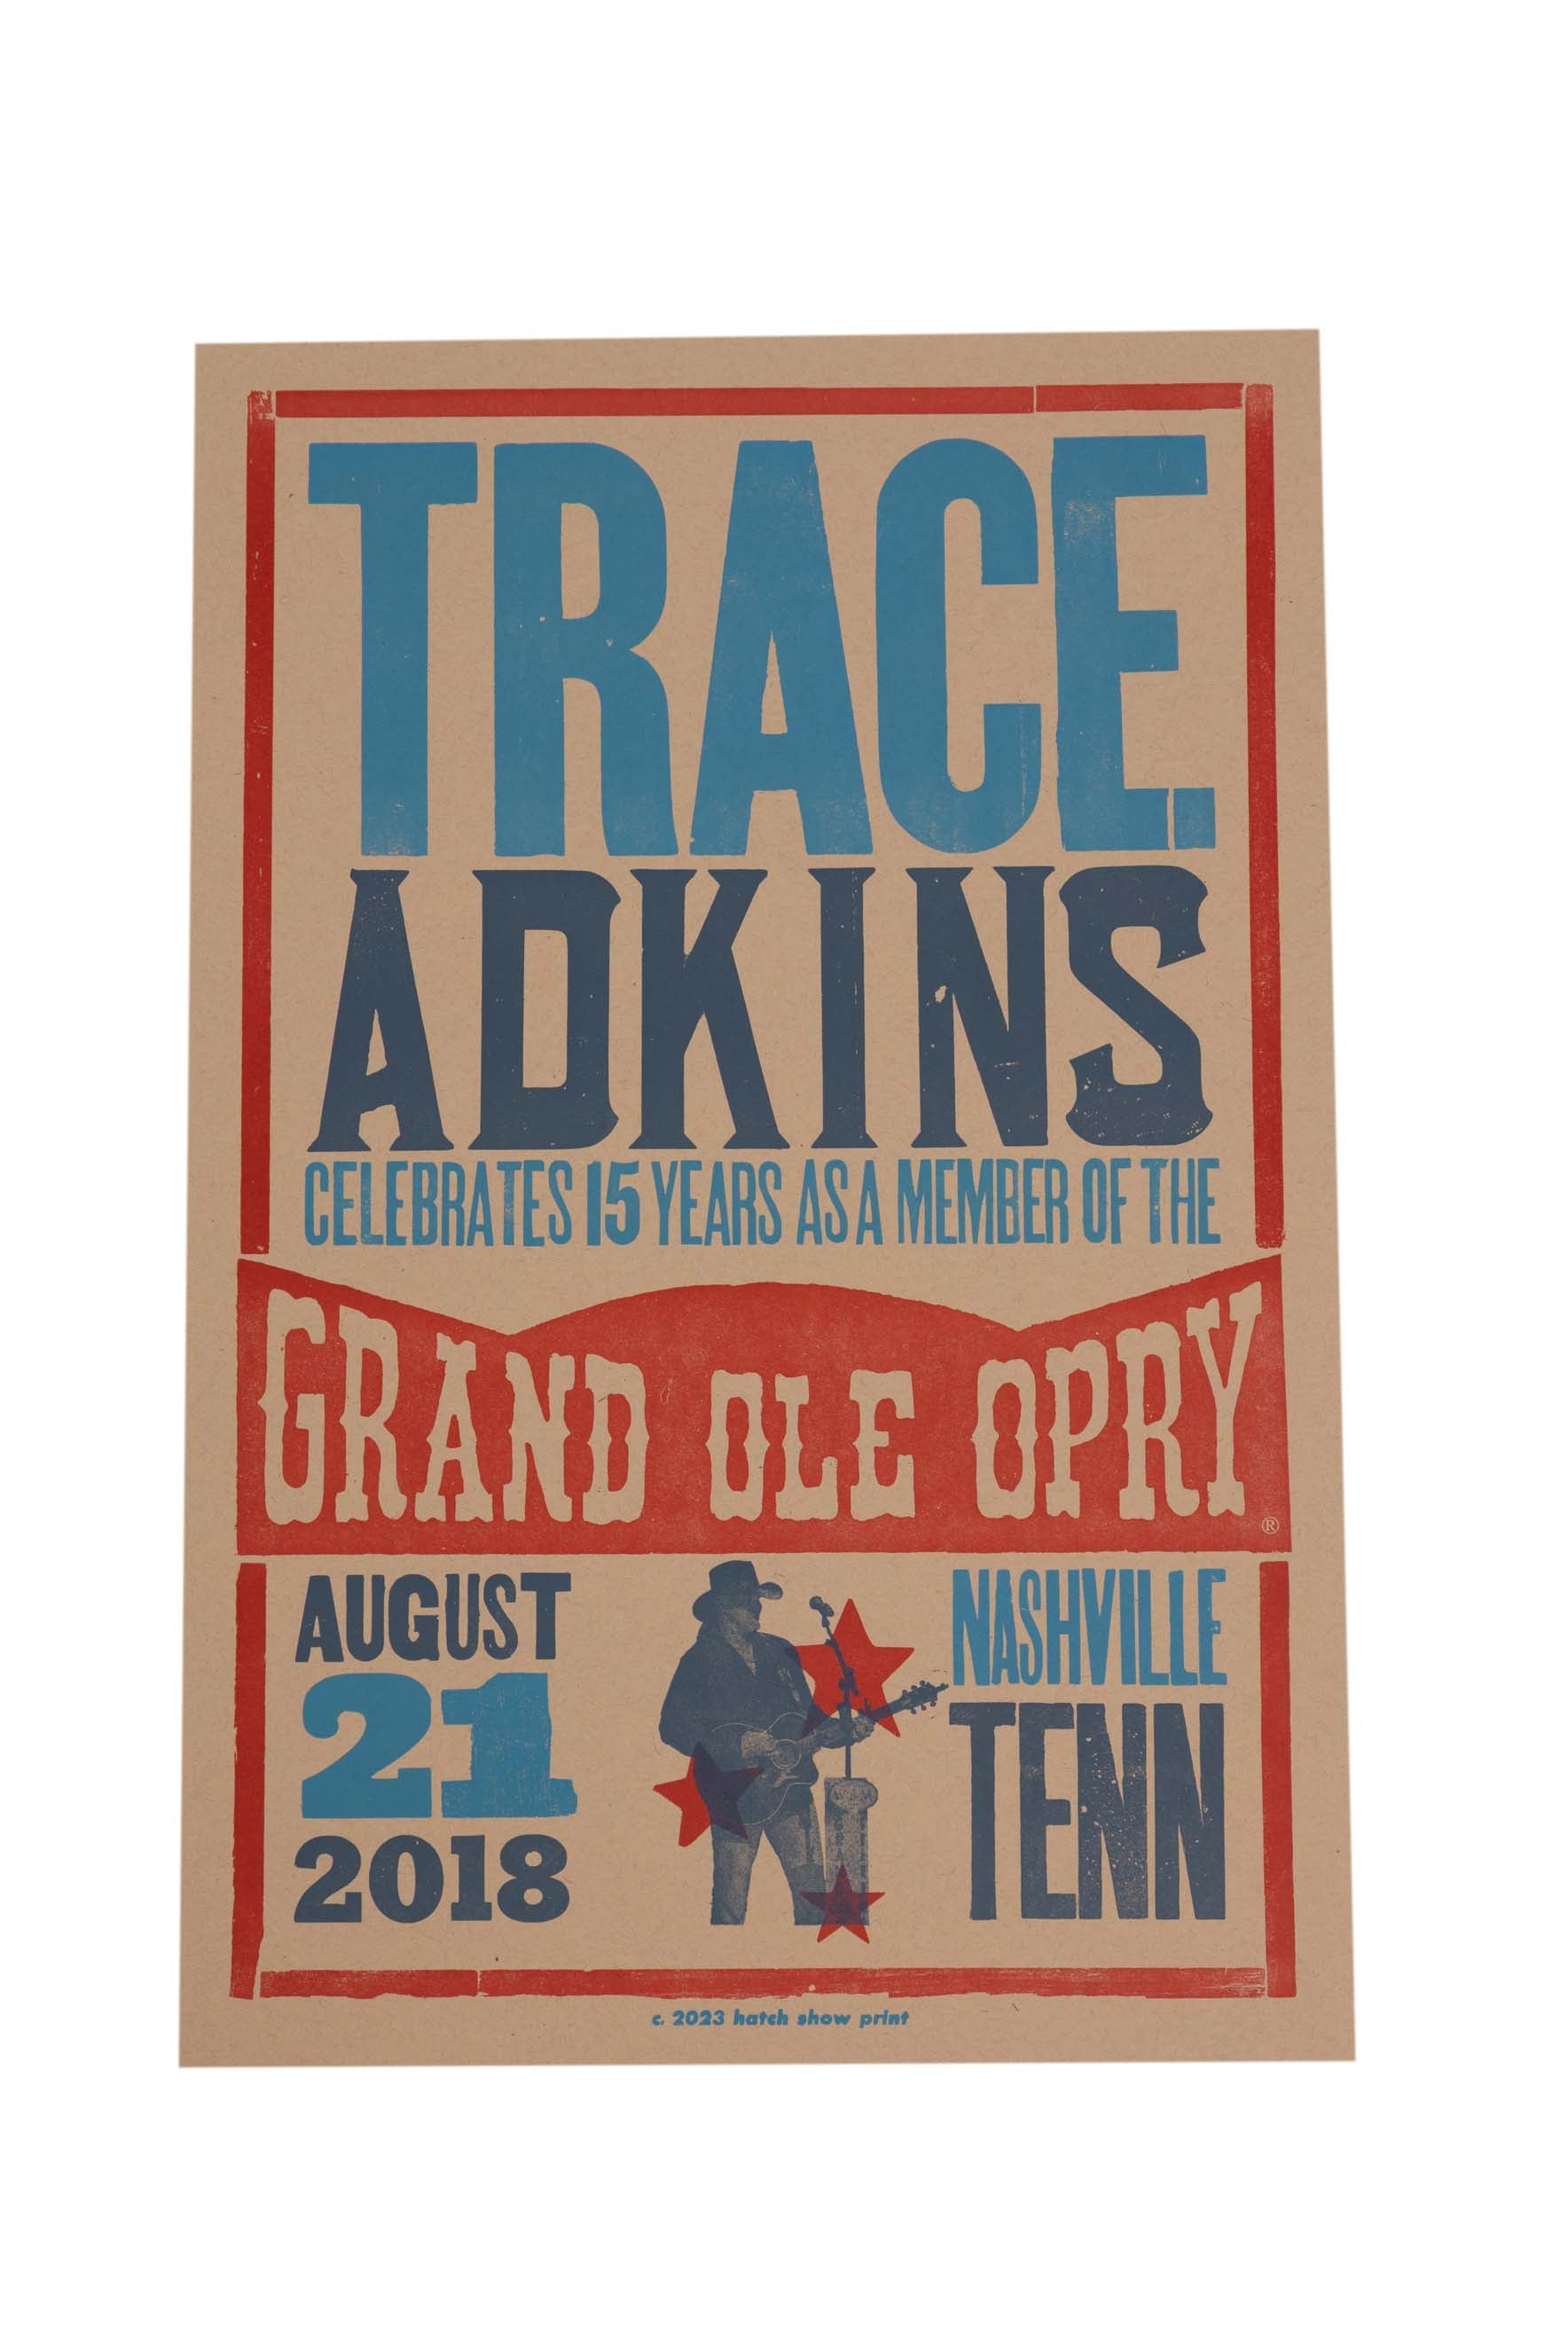 Trace Adkins 15th Opry Anniversary Hatch Show Print